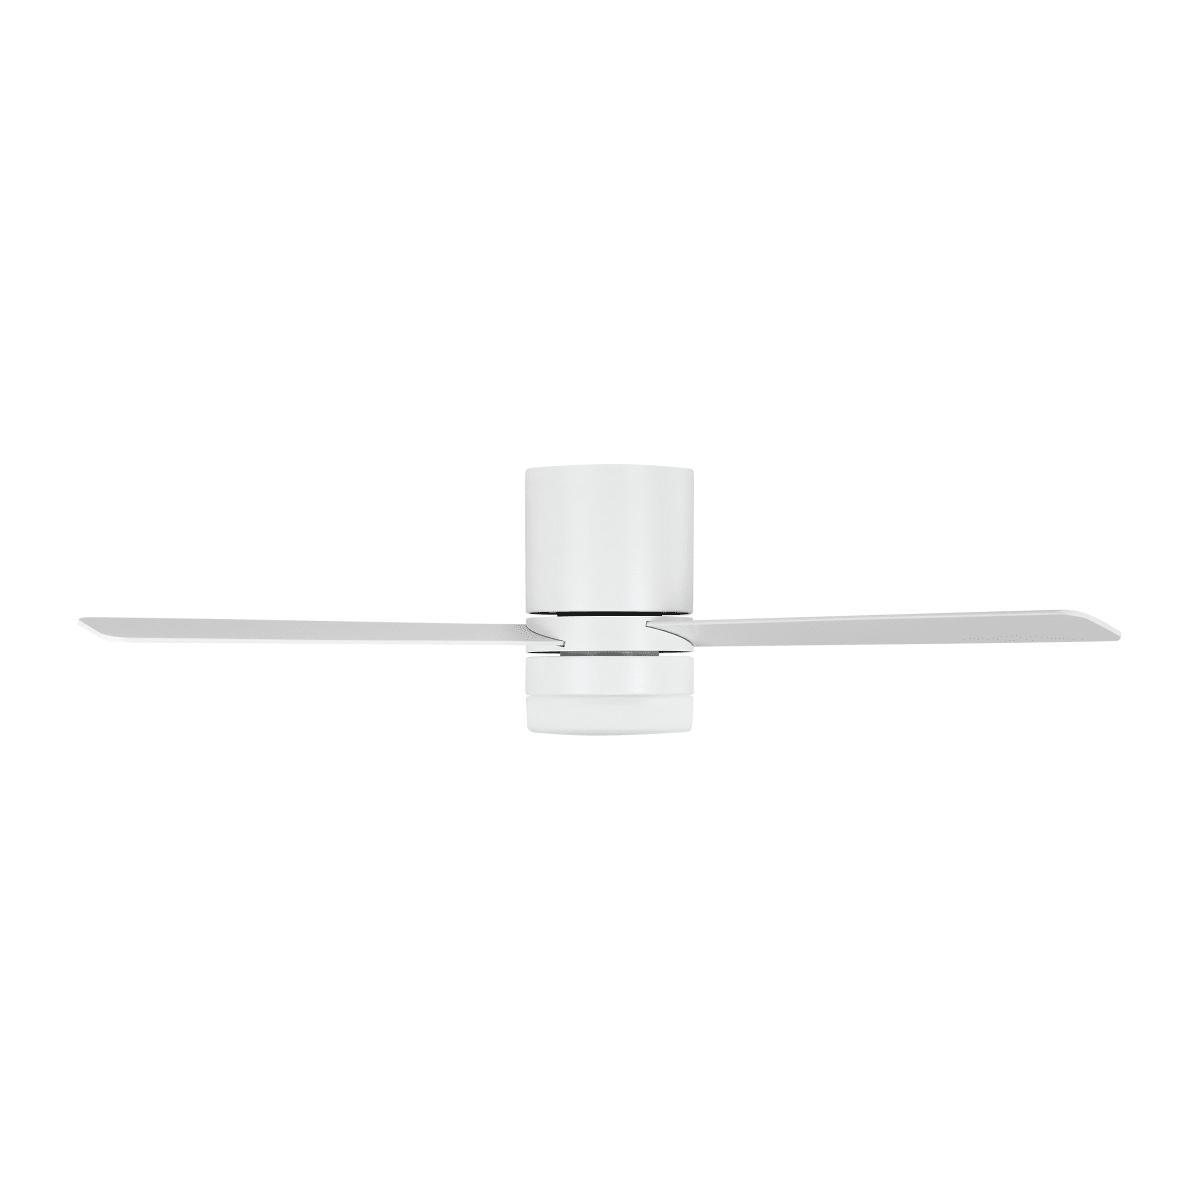 Era 52 Inch Hugger LED Ceiling Fan With Wall Control - Bees Lighting